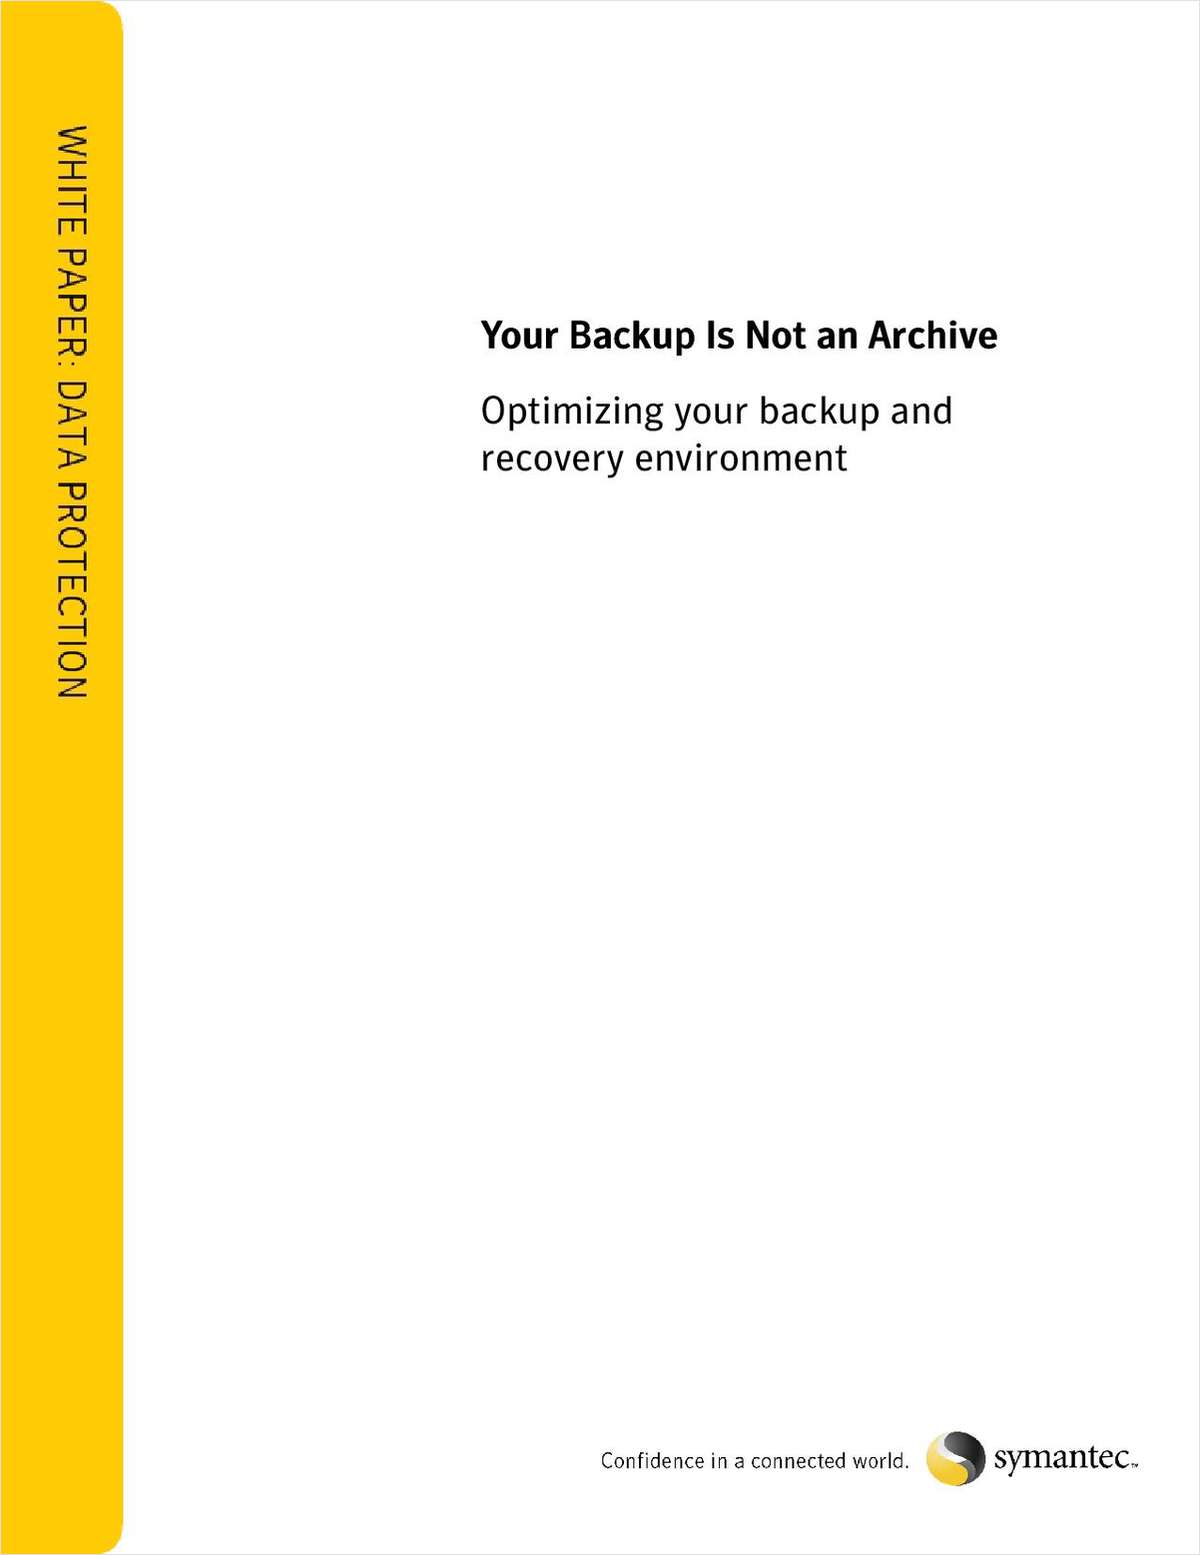 Your Backup Is Not an Archive -Optimizing Your Backup and Recovery Environment